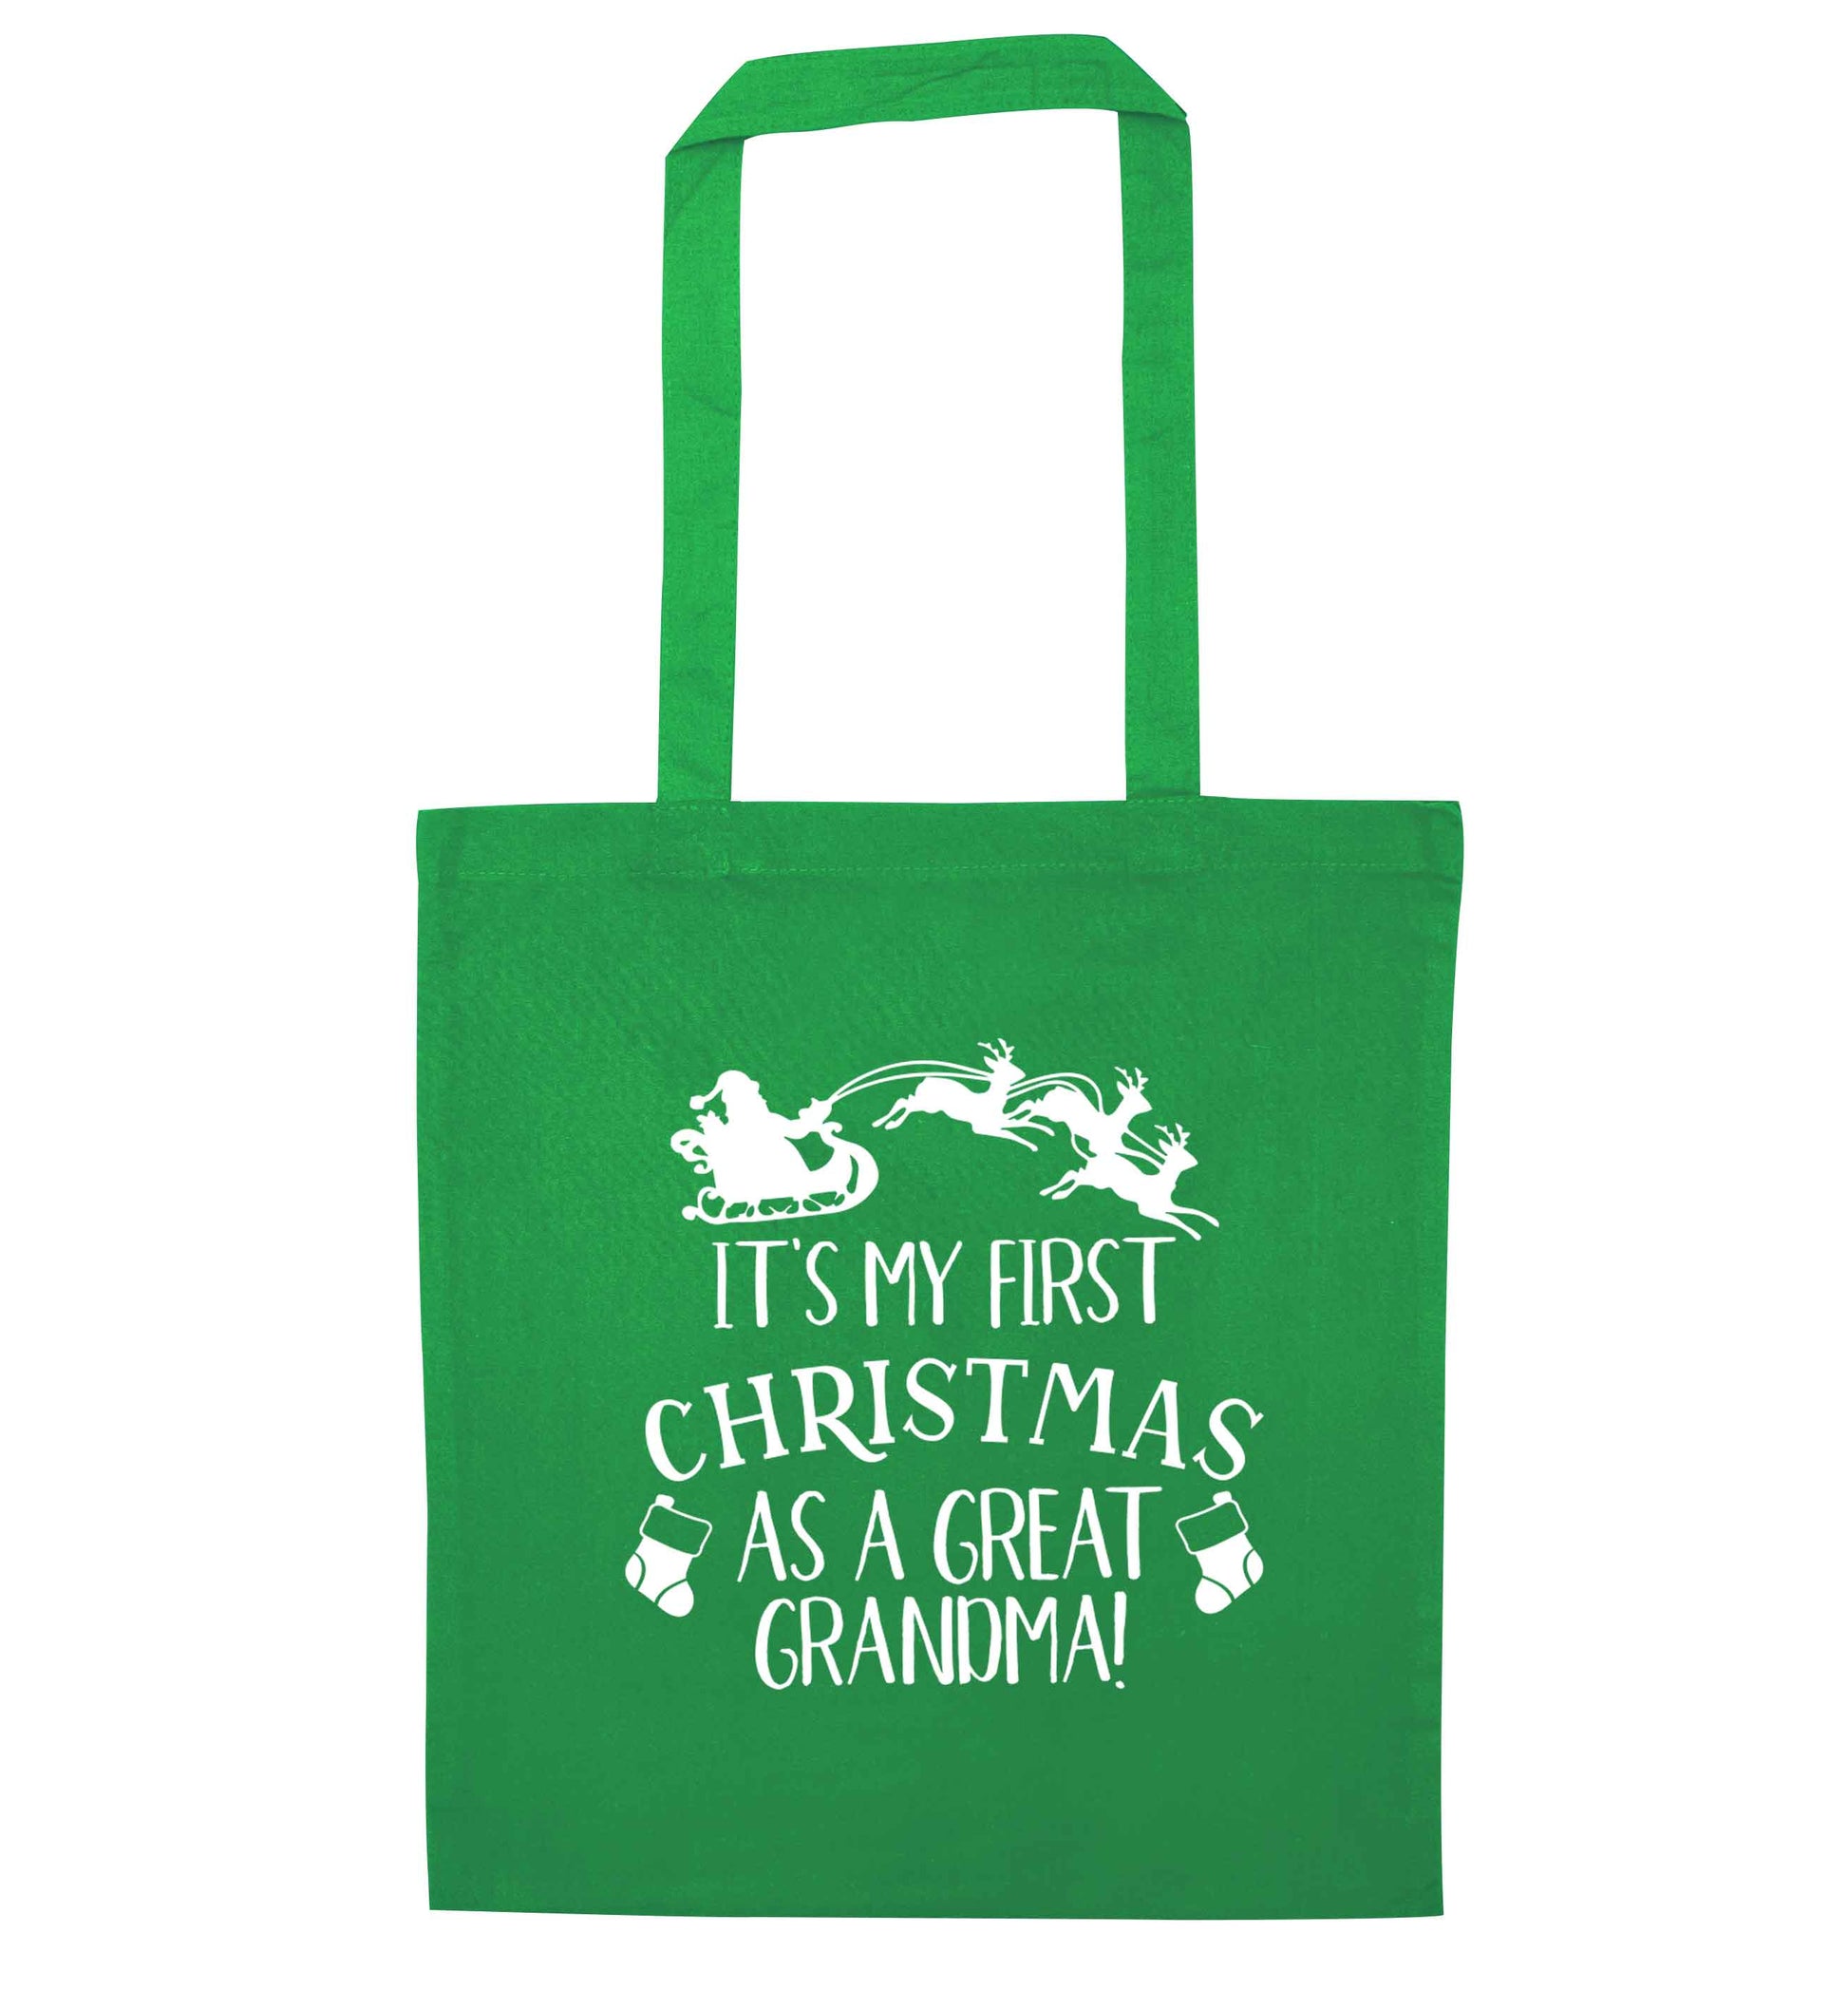 It's my first Christmas as a great grandma! green tote bag